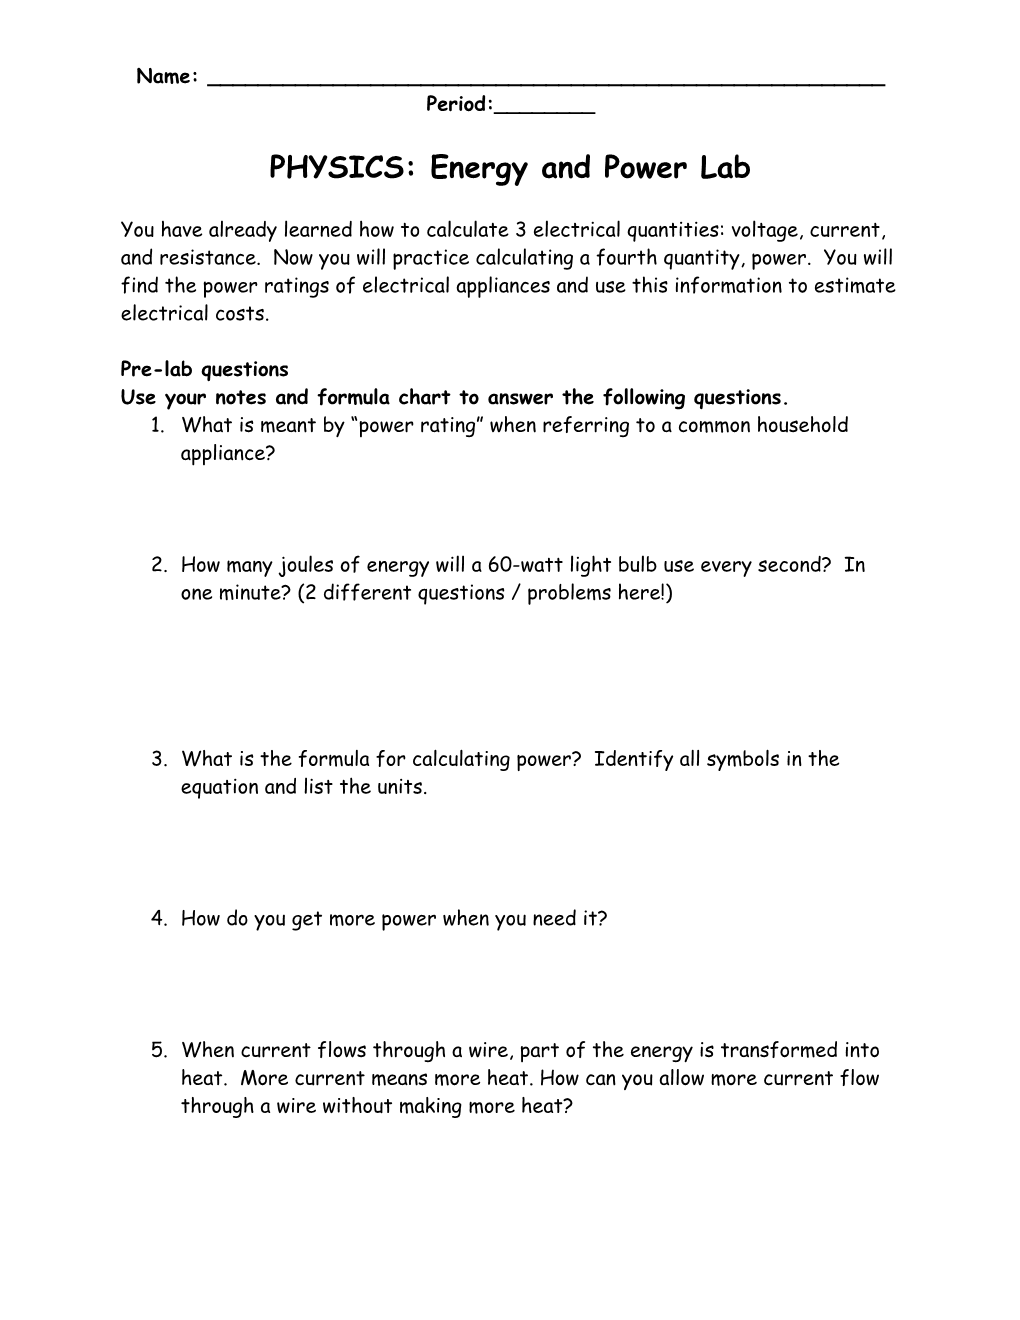 Energy and Power Lab